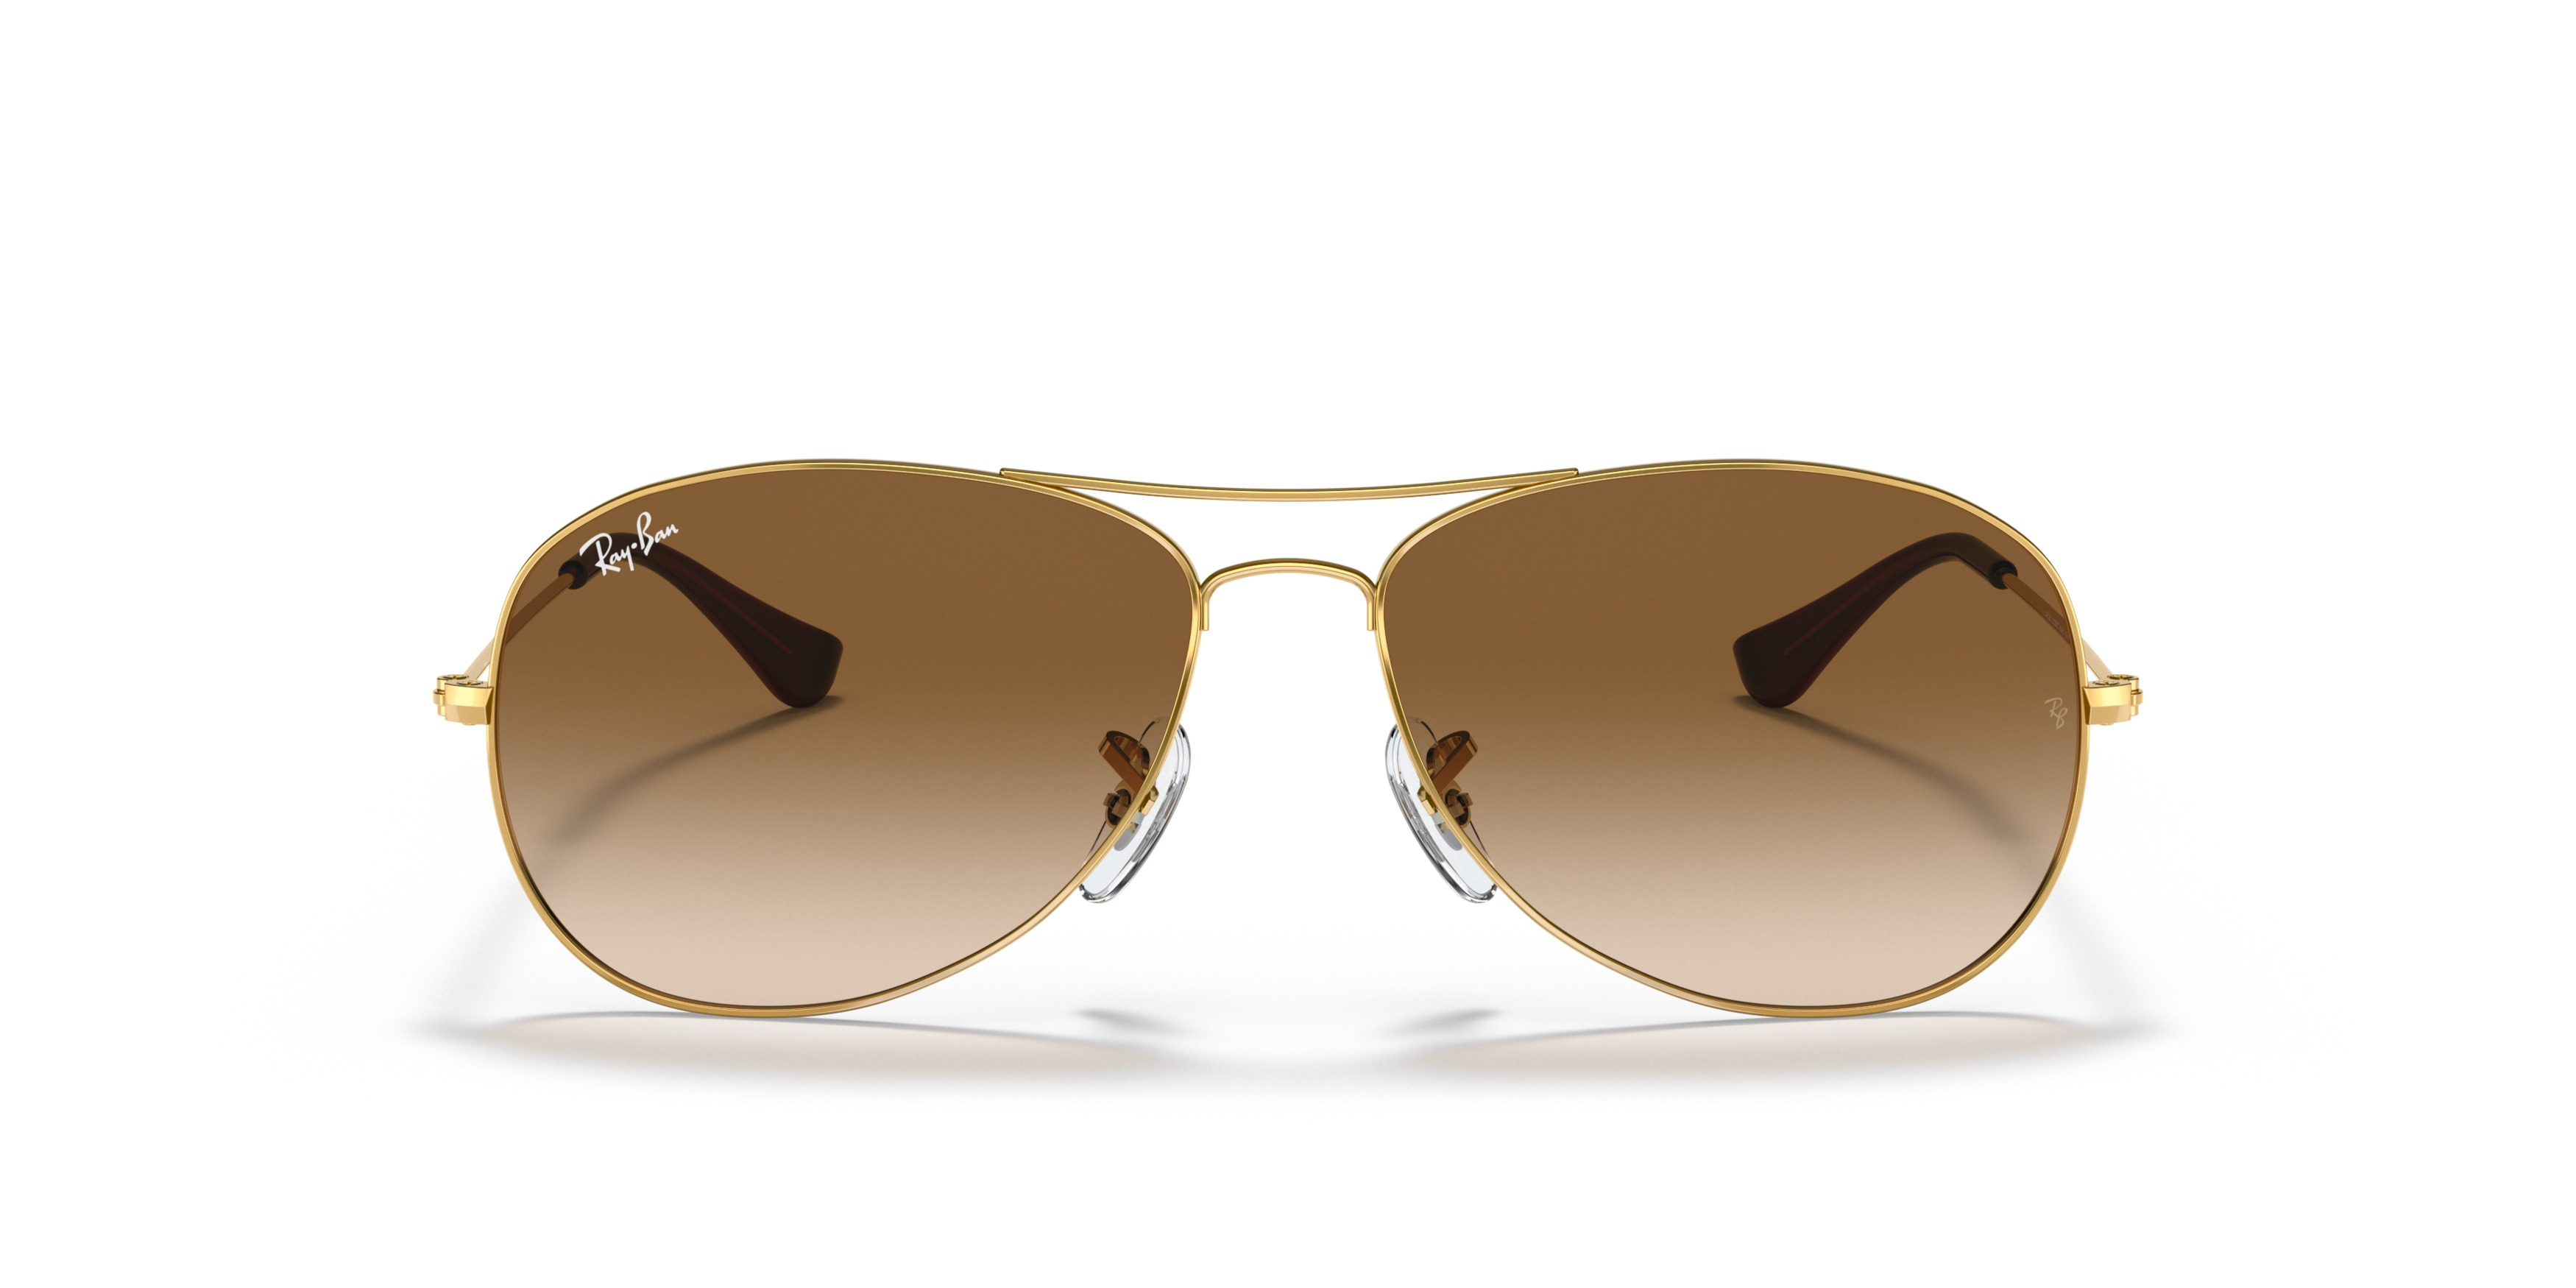 [products.image.front] Ray-Ban Cockpit RB3362 001/51